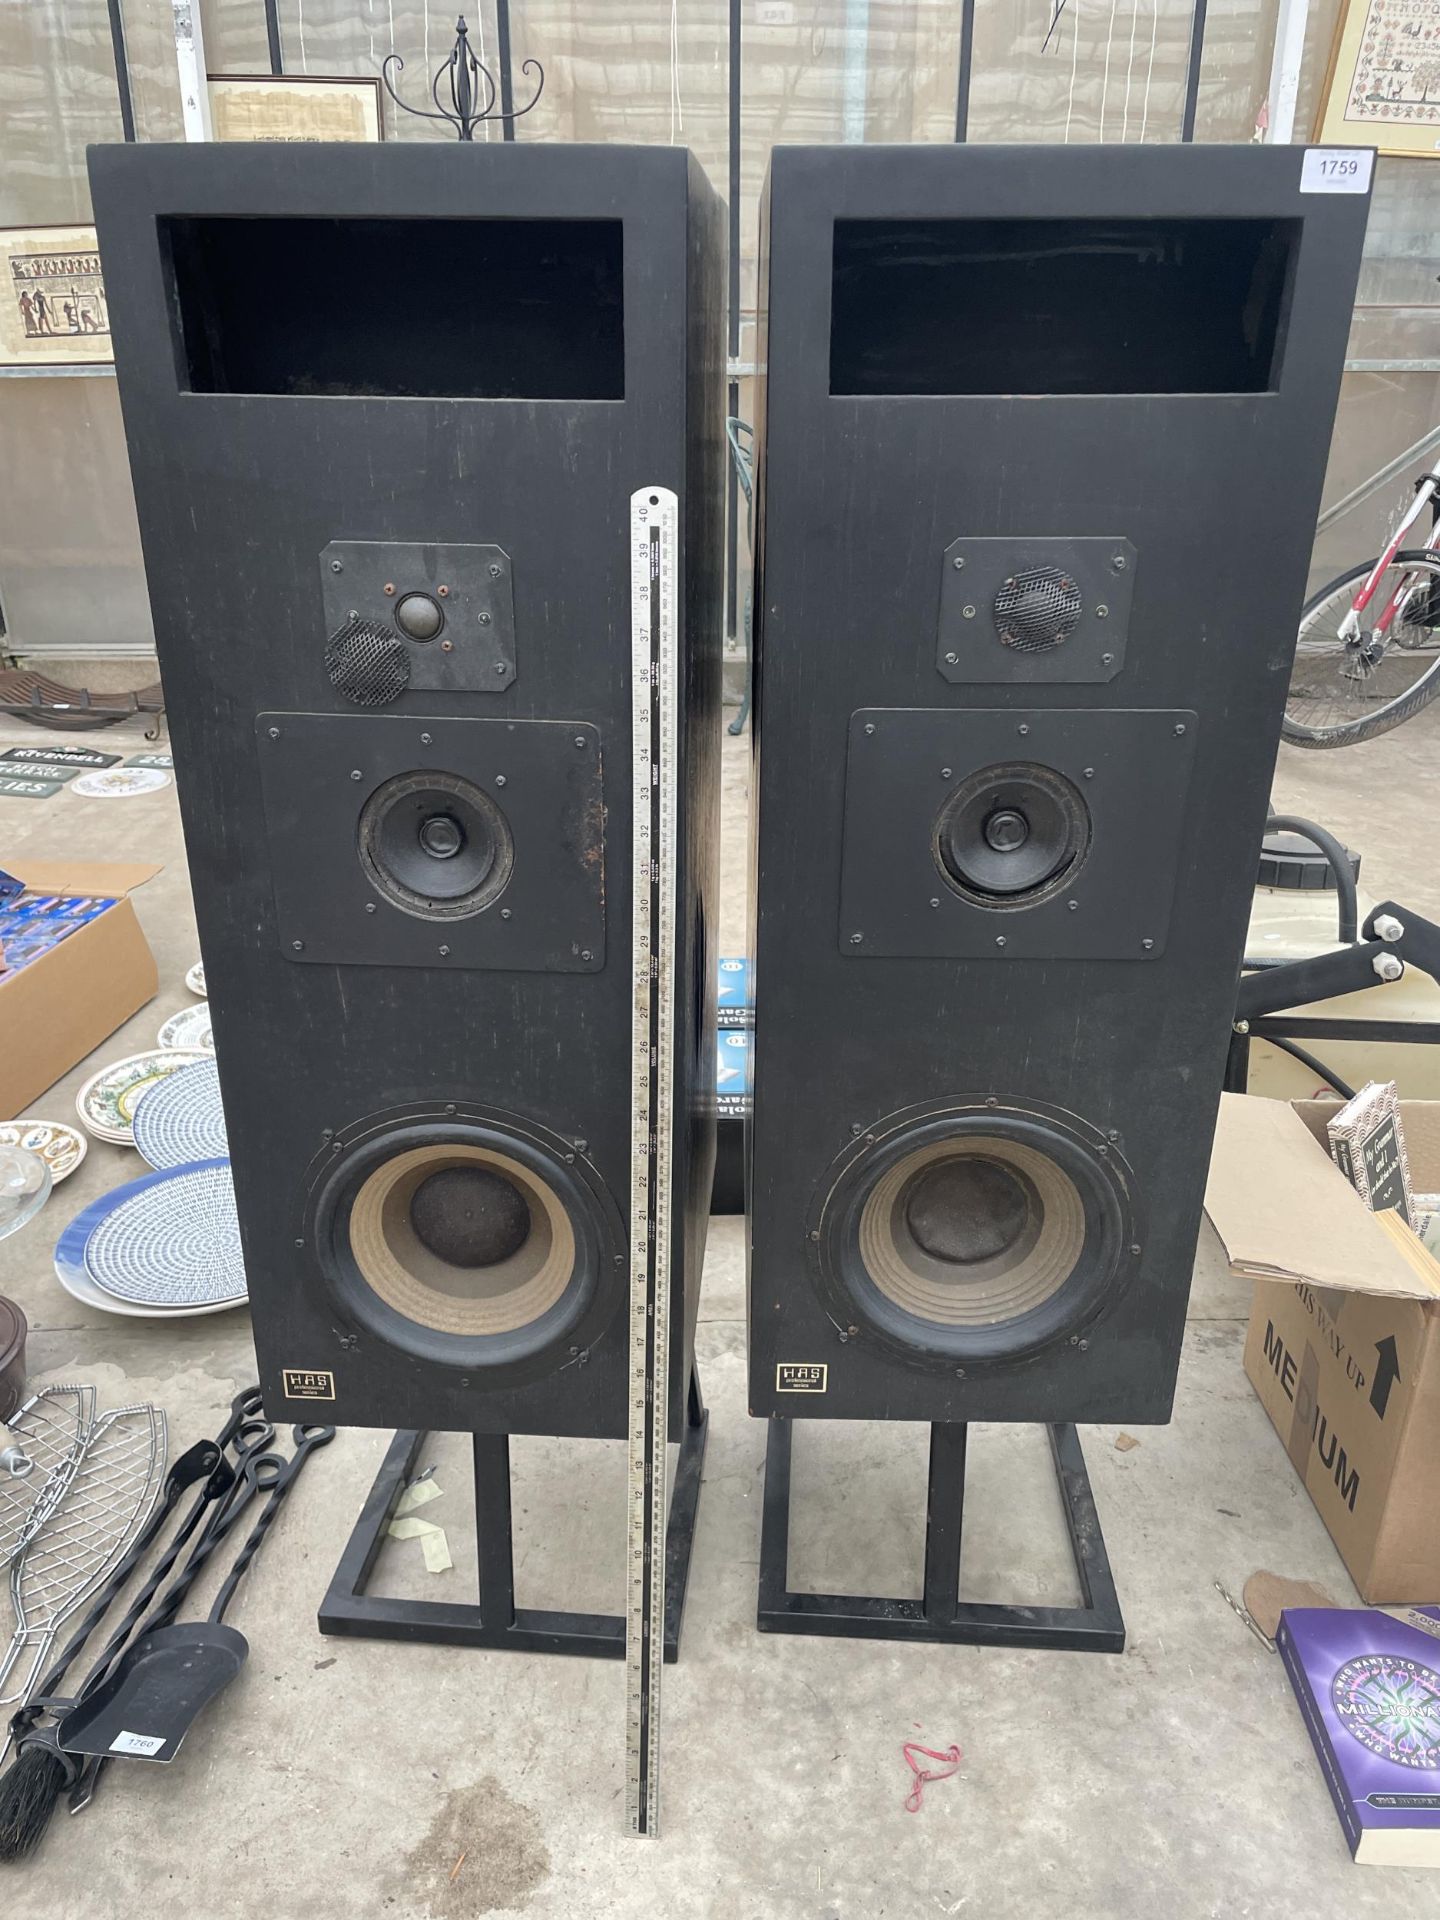 A PAIR OF TALL HAS PROFESSIONAL SERIES SPEAKERS